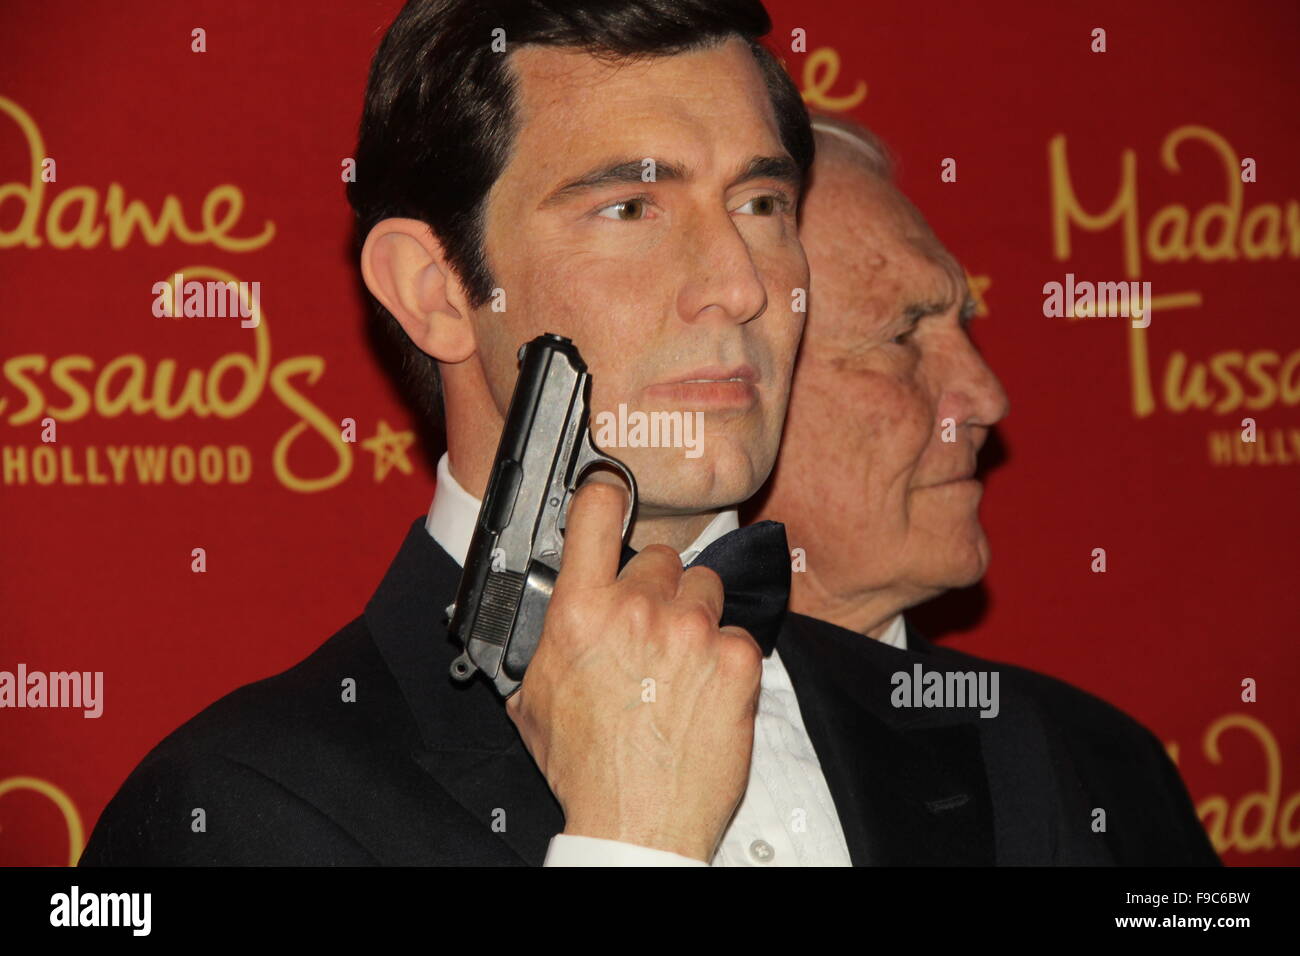 Hollywood, California, USA. 15th Dec, 2015. I15797CHW.Madame Tussauds Hollywood Reveal All Six James Bonds In Wax With Special Guest George Lazenby Madame Tussauds-Hollywood, Hollywood, CA.12/15/2015.GEORGE LAZENBY POSING WITH A WAX FIGURE OF HIS JAMES BOND CHARACTER .©Clinton H. Wallace/Photomundo International/ Photos Inc © Clinton Wallace/Globe Photos/ZUMA Wire/Alamy Live News Stock Photo